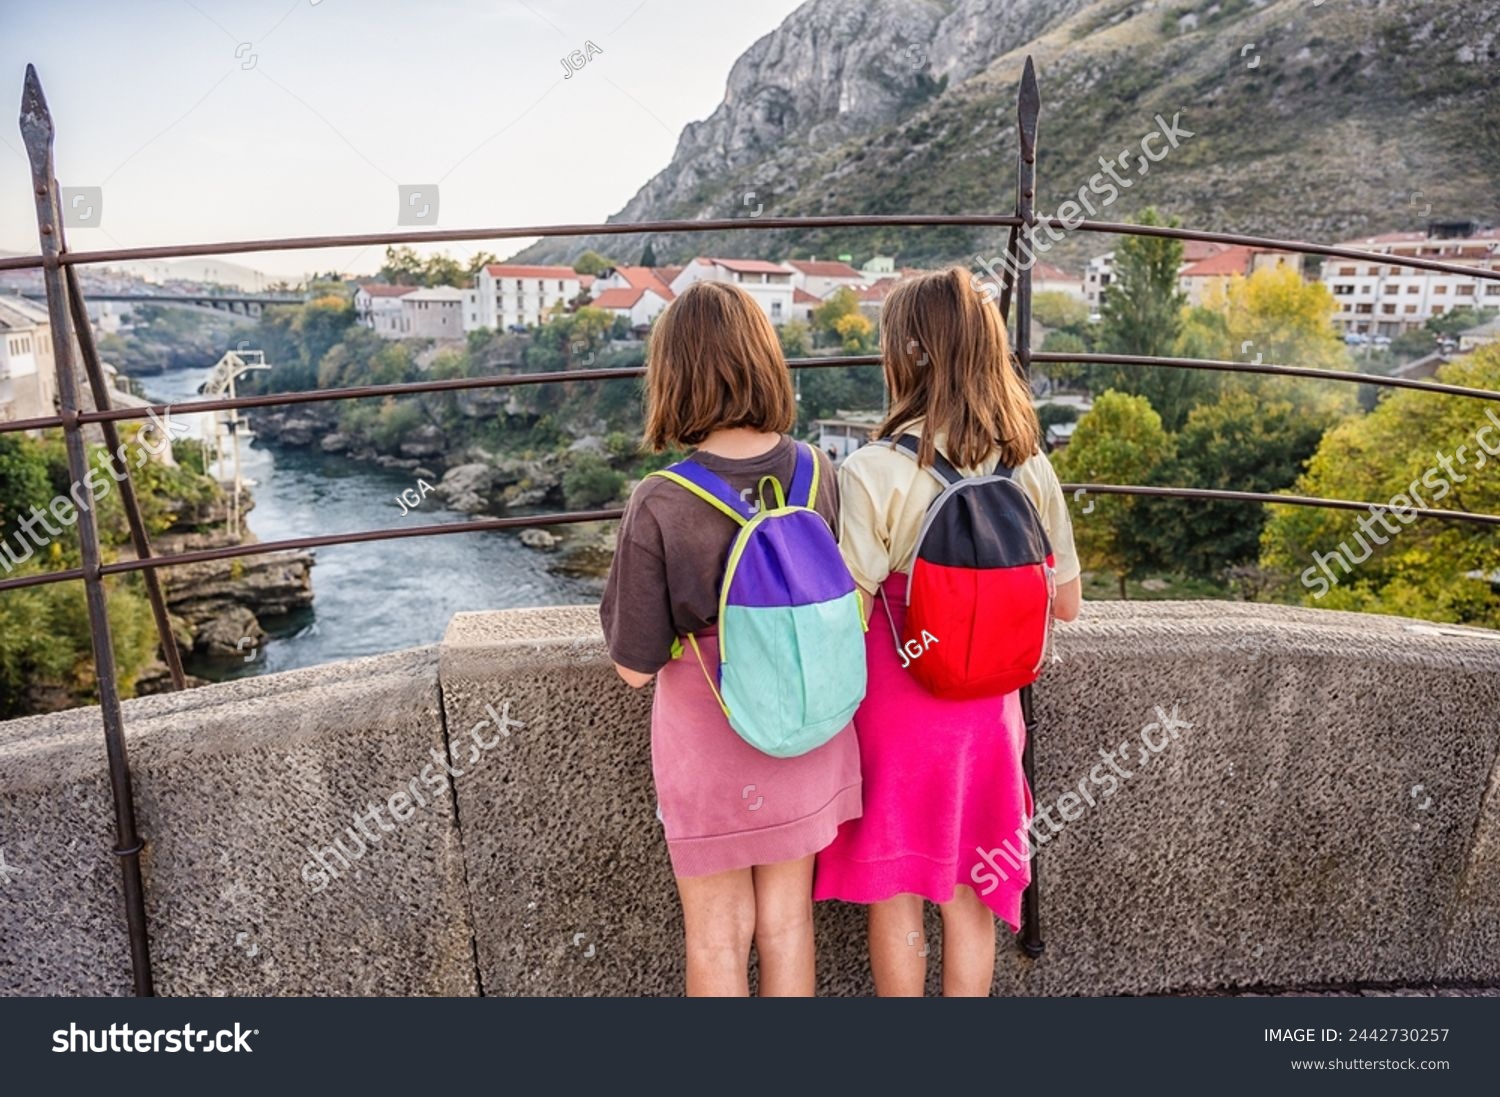 Twin girls standing on famous Mostar bridge, looking at Mostar town and river Neretva in Bosnia and Herzegovina. Historical Mostar Bridge known also as Stari Most or Old Bridge in Mostar. #2442730257